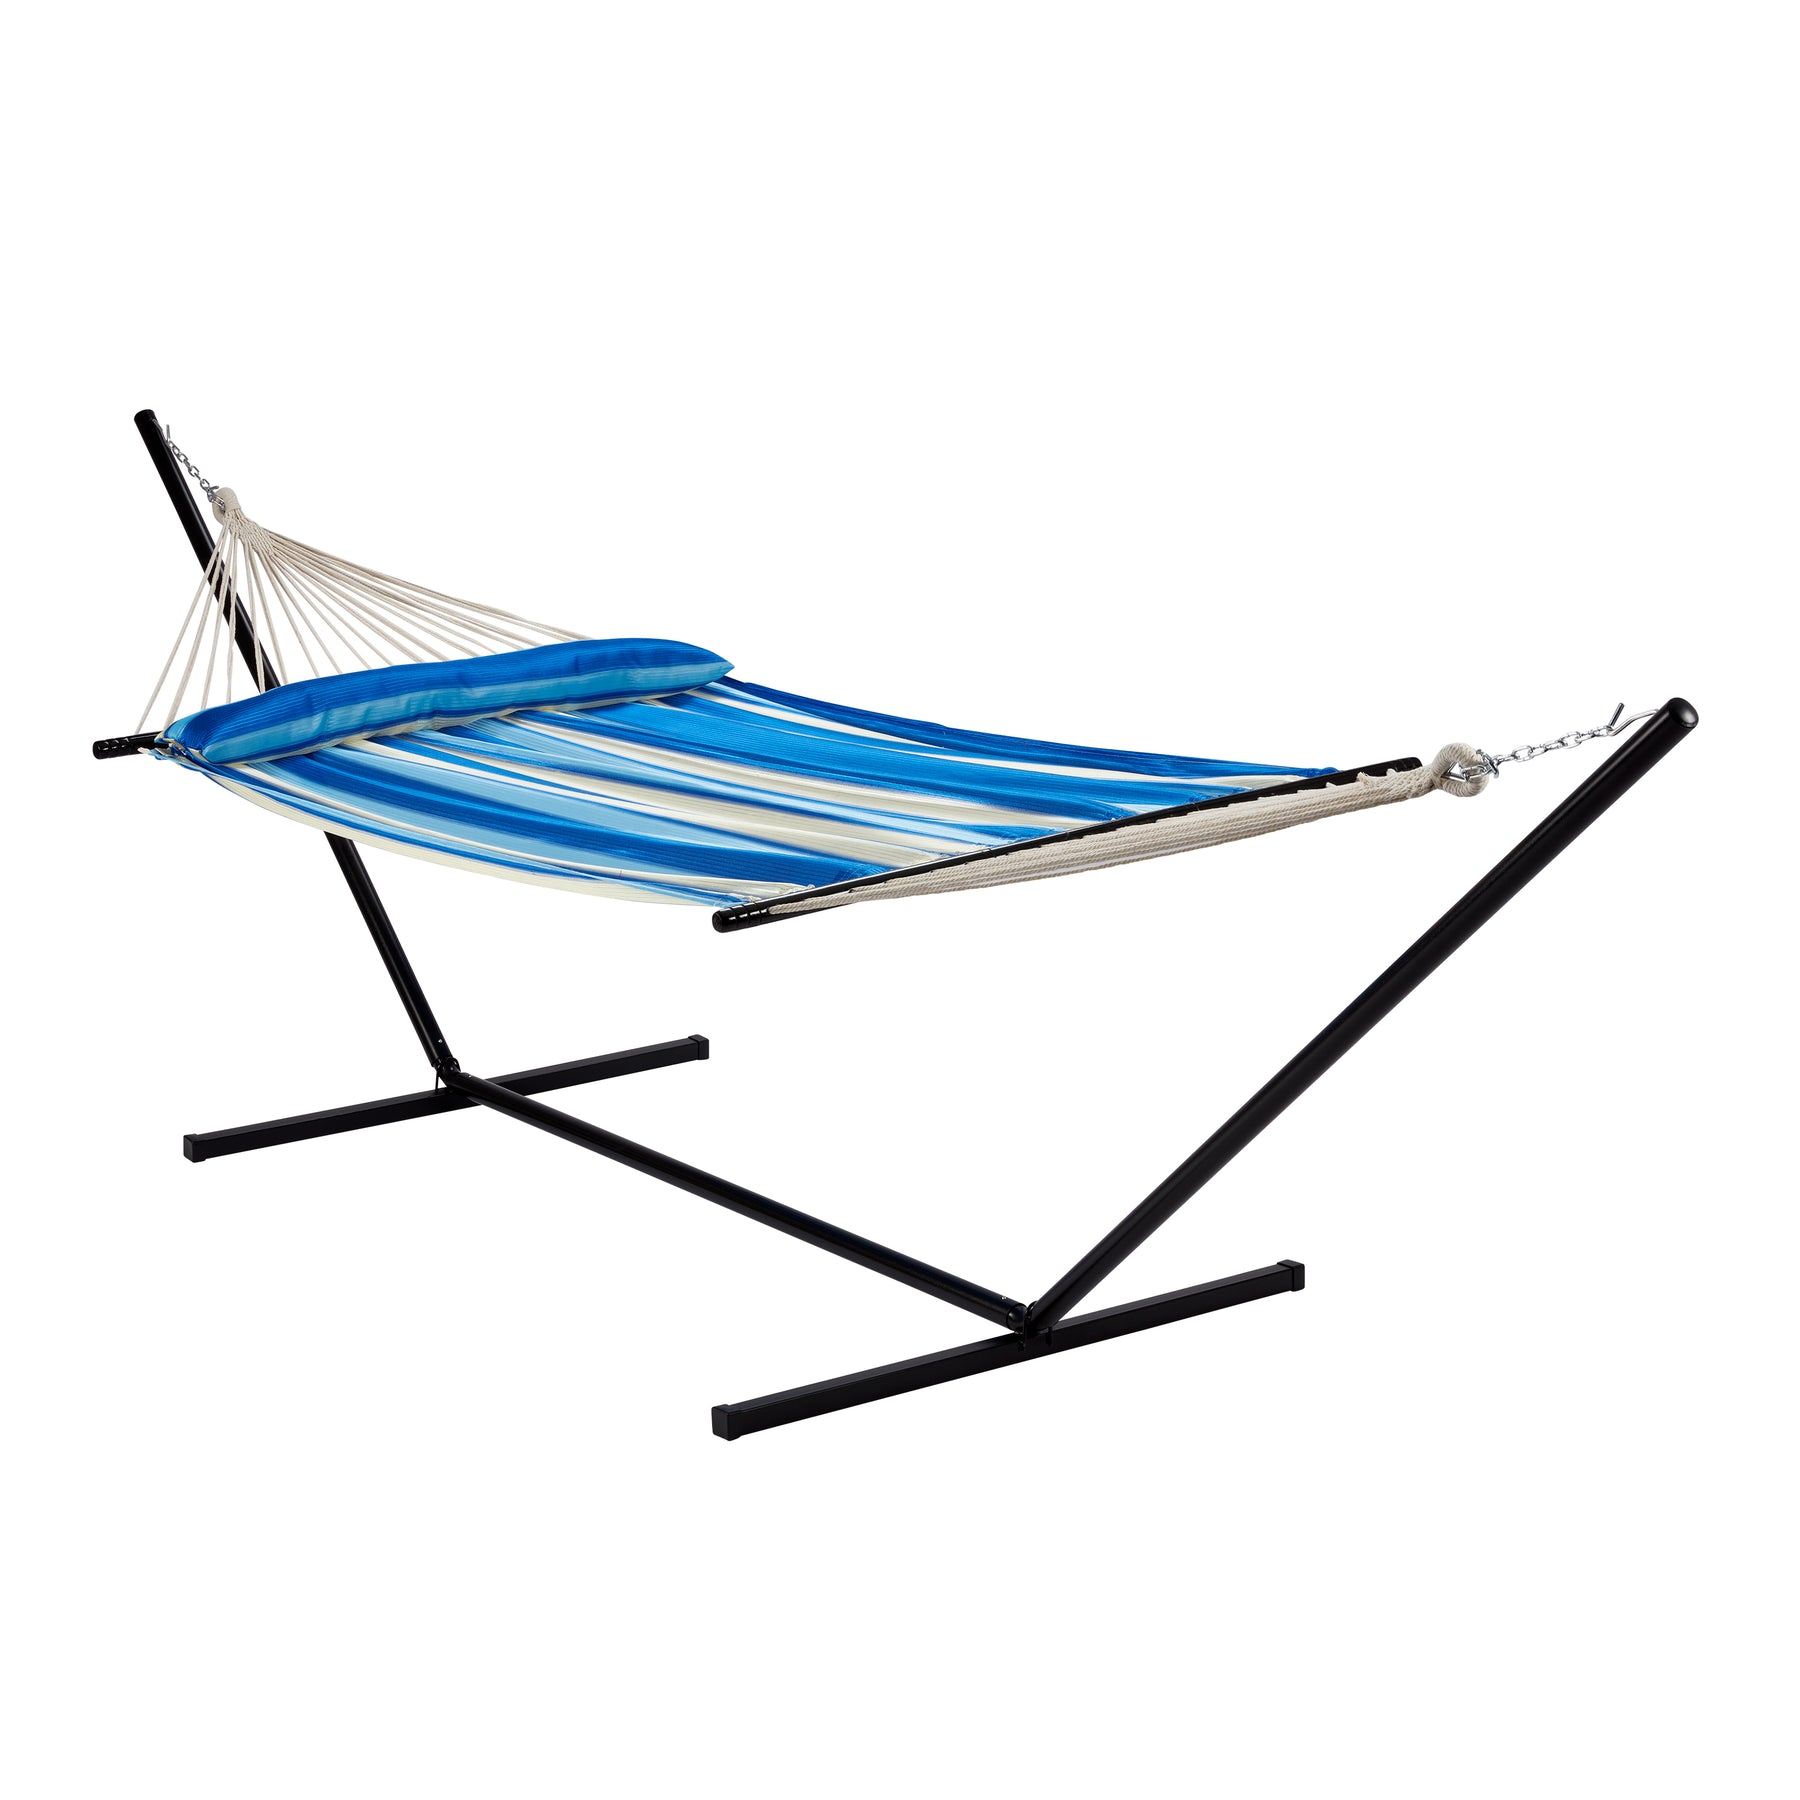 Bliss Hammocks 55-inch Wide Ventaleen Breathable Performance 2 Person Hammock with Pillow with blue and white stripes attached to a Hammock Stand.